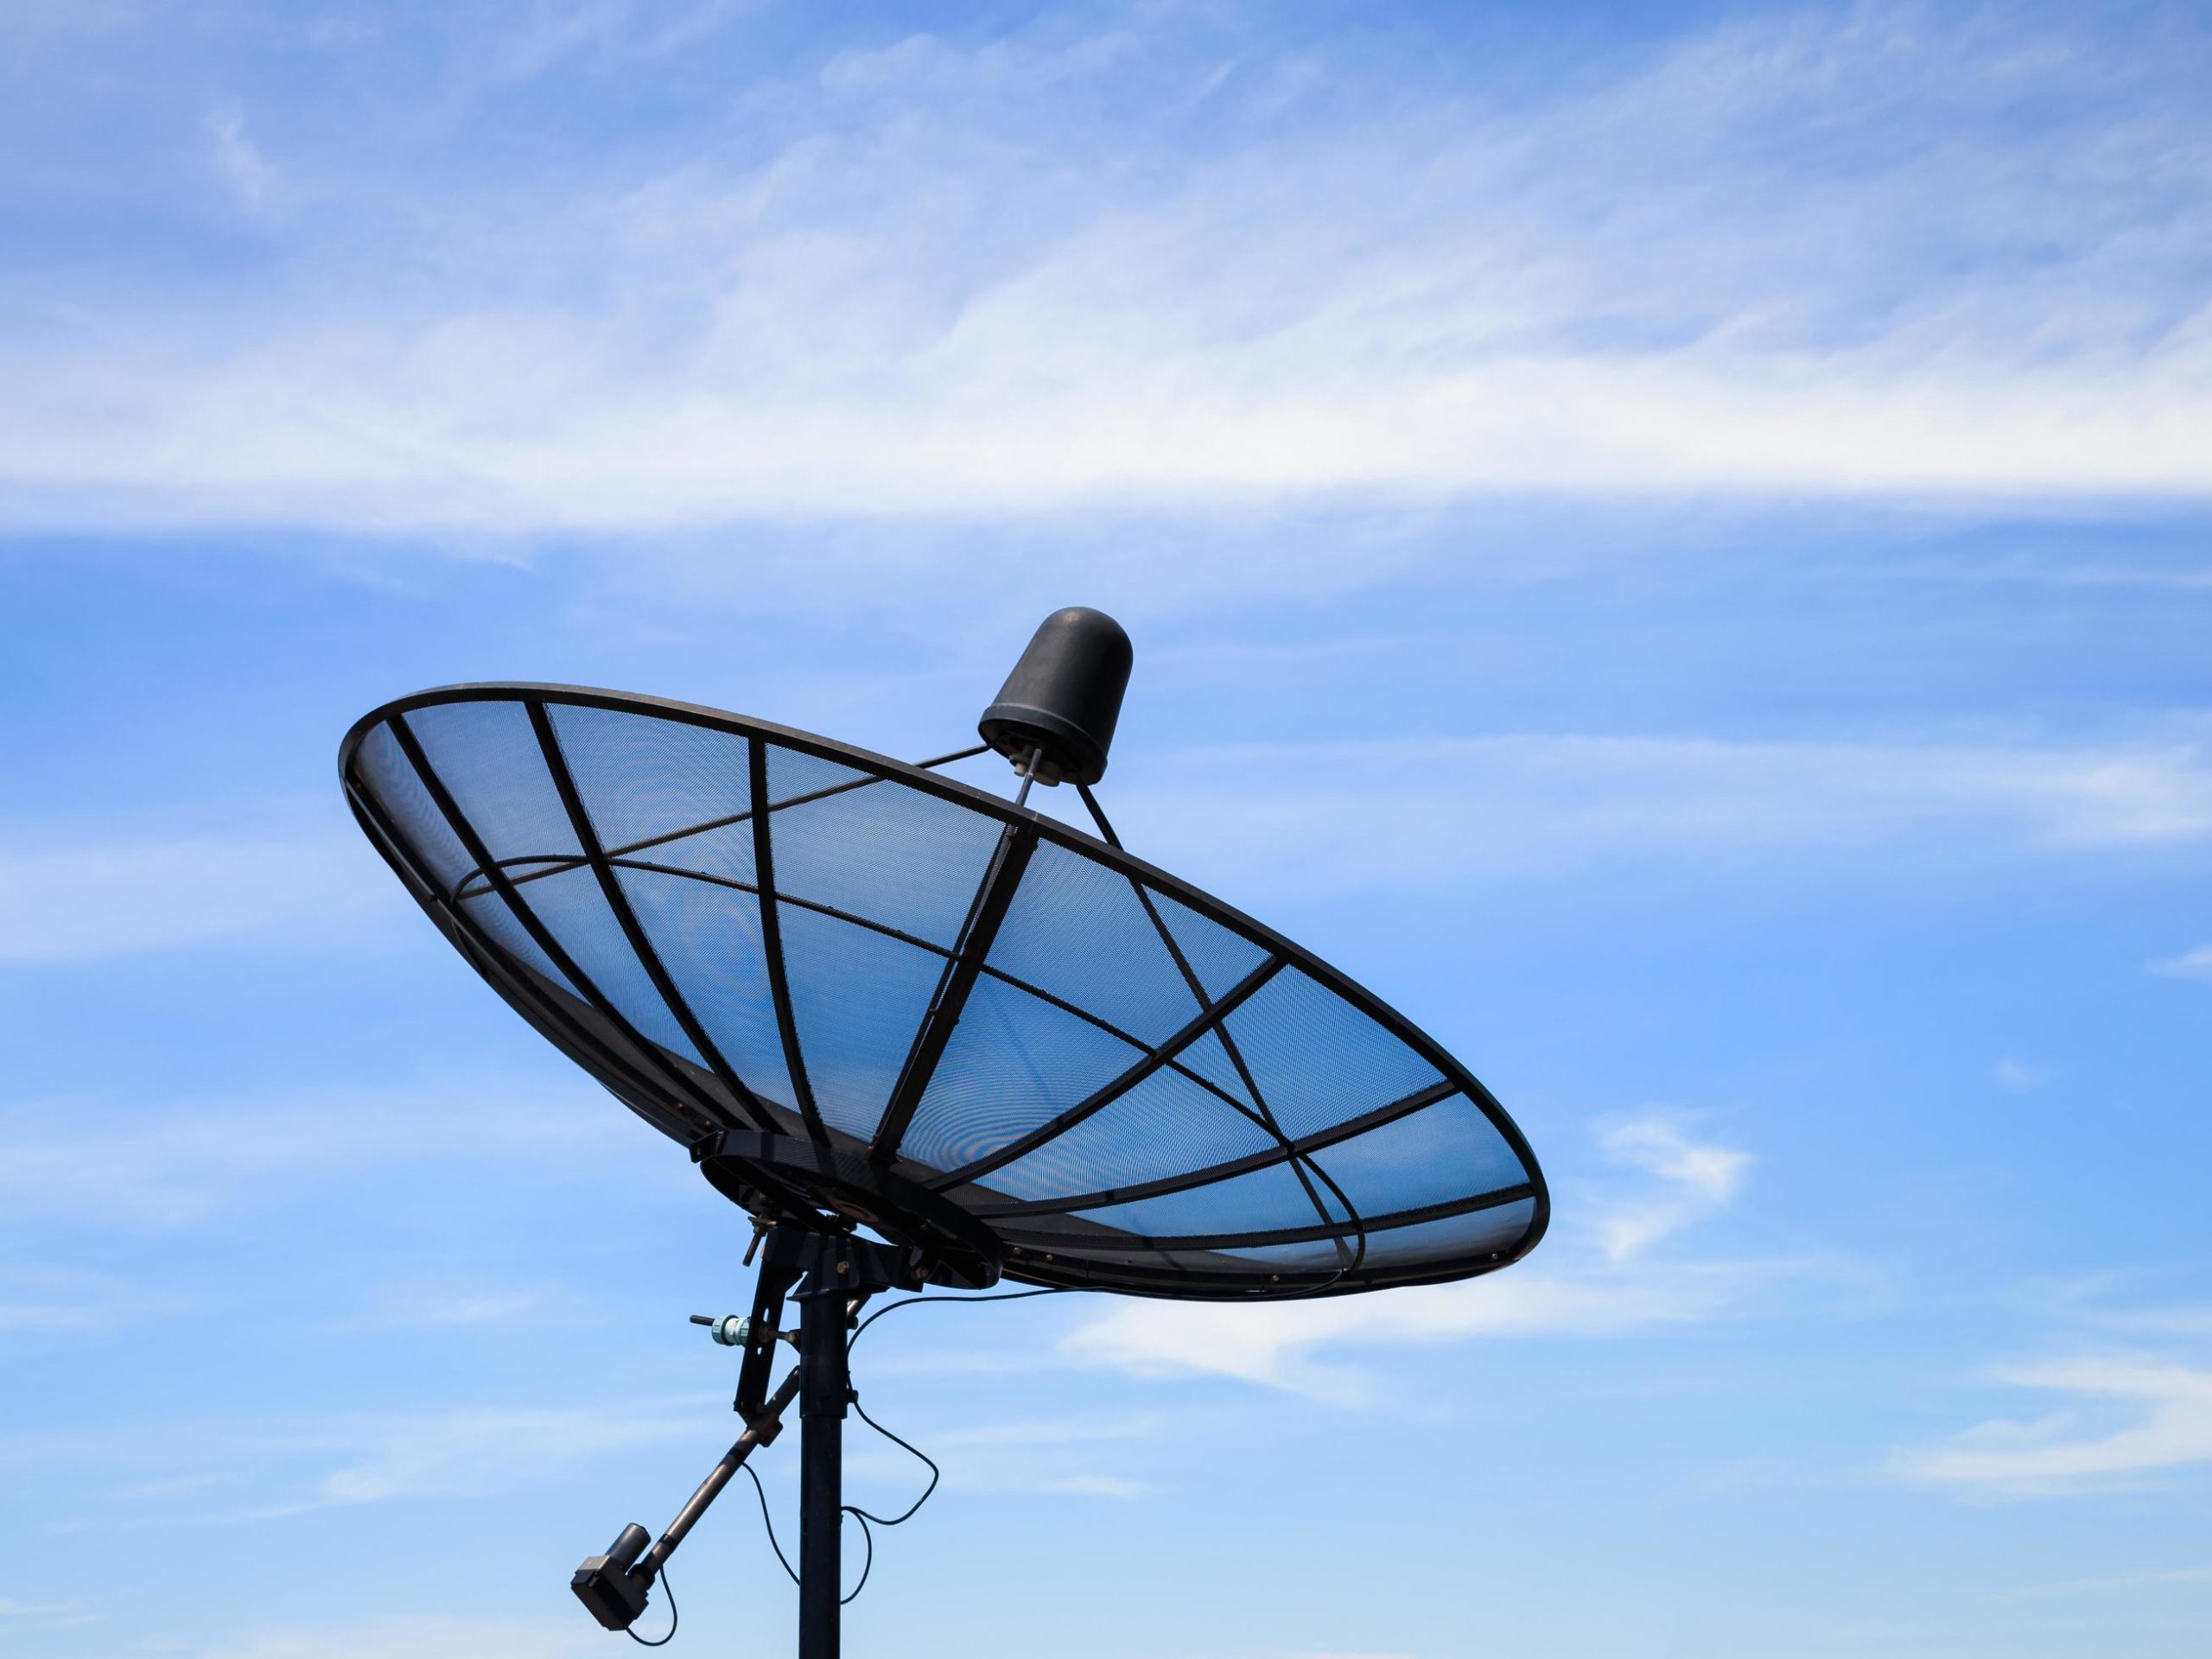 Home Satellite Dish Receiver With Blue Sky Free Photo